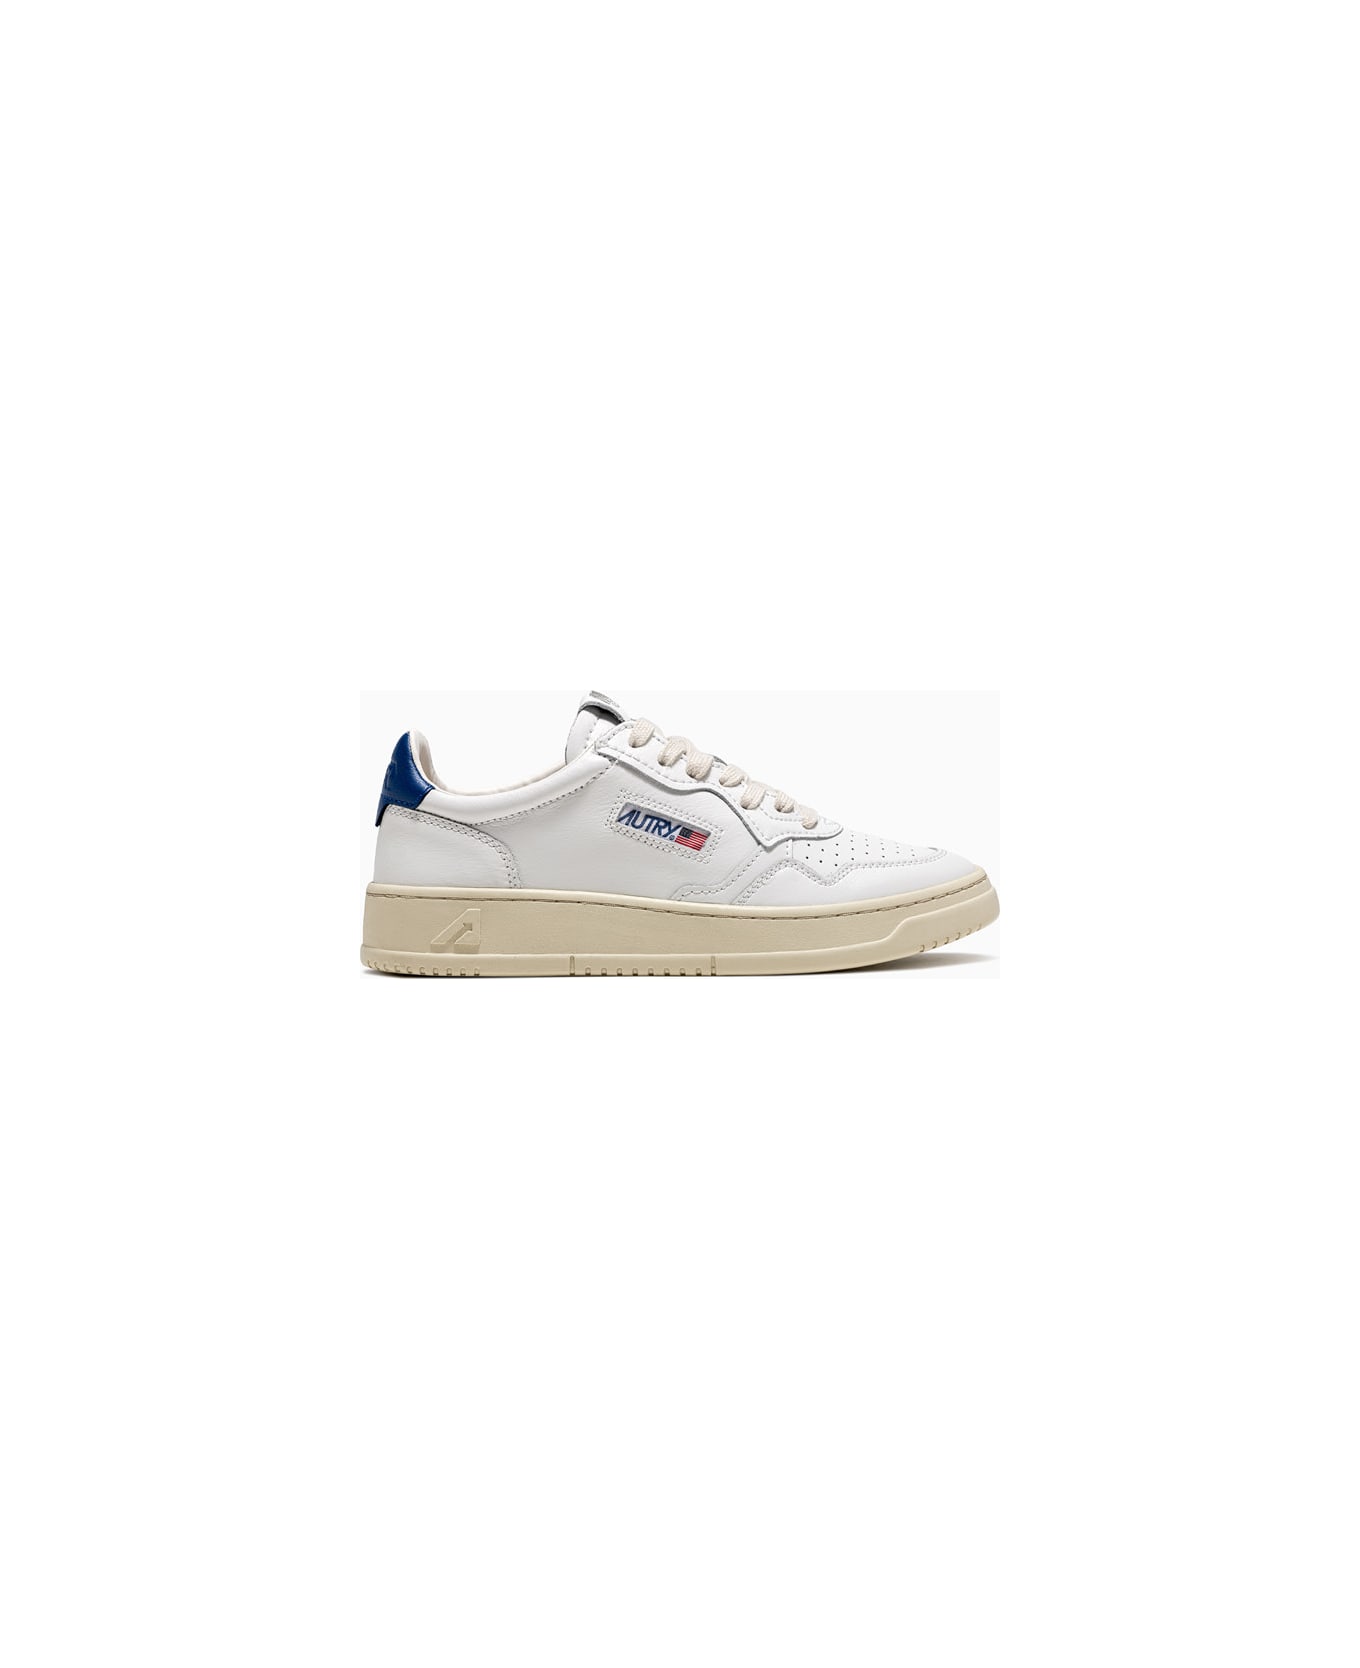 Autry Low Aulum Ll12 Sneakers - White スニーカー